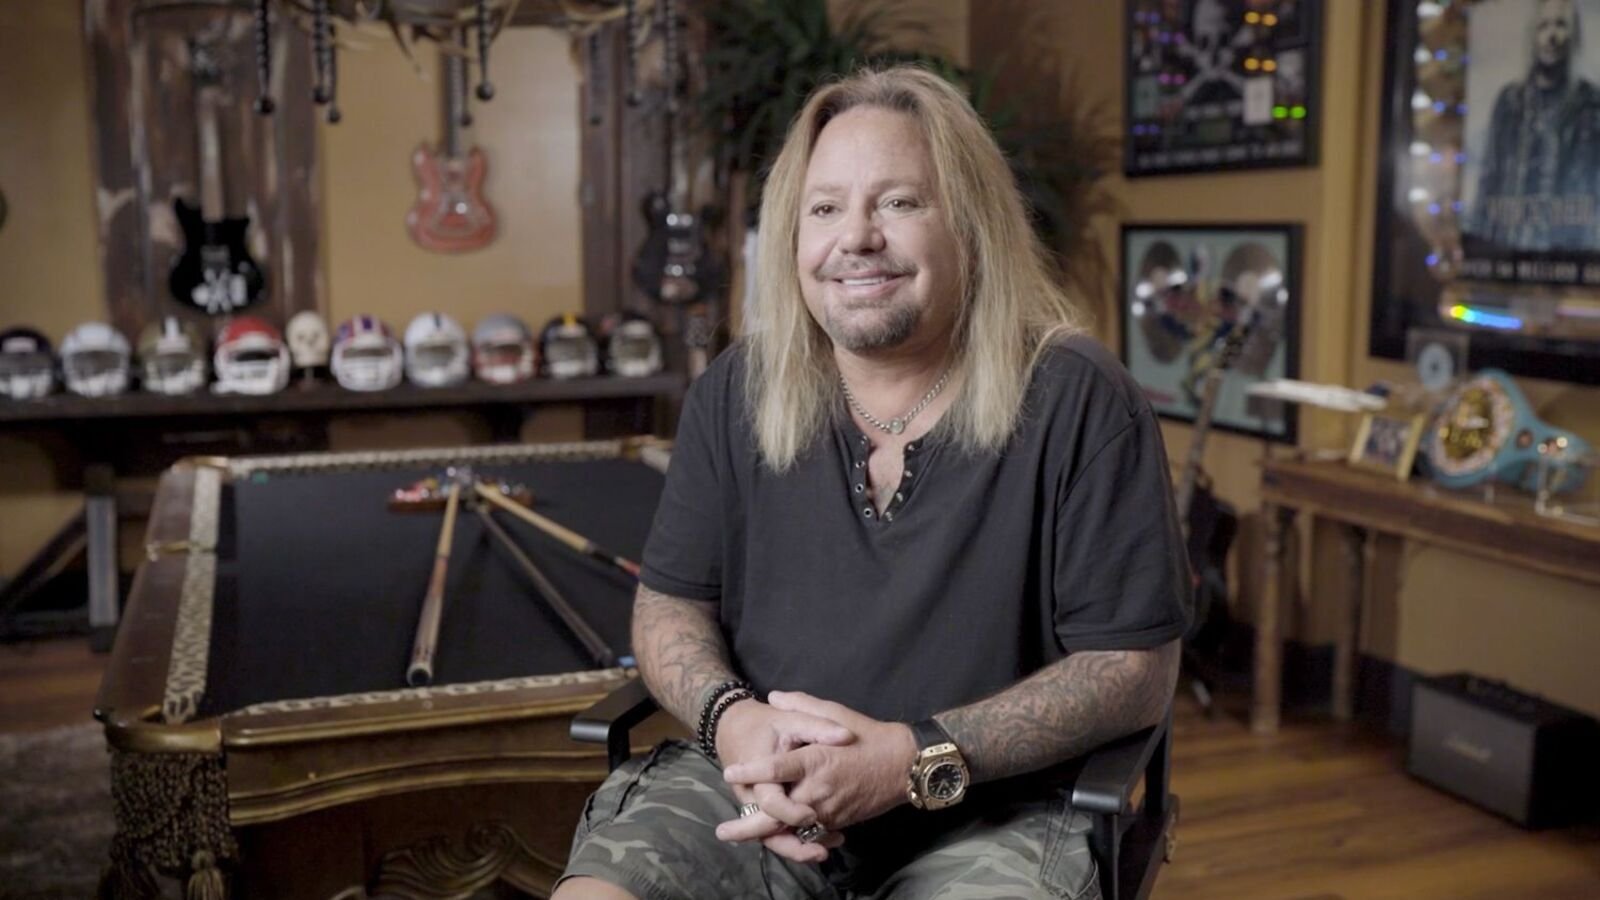 The Top 6 Albums That Vince Neil Listed As His Favorites